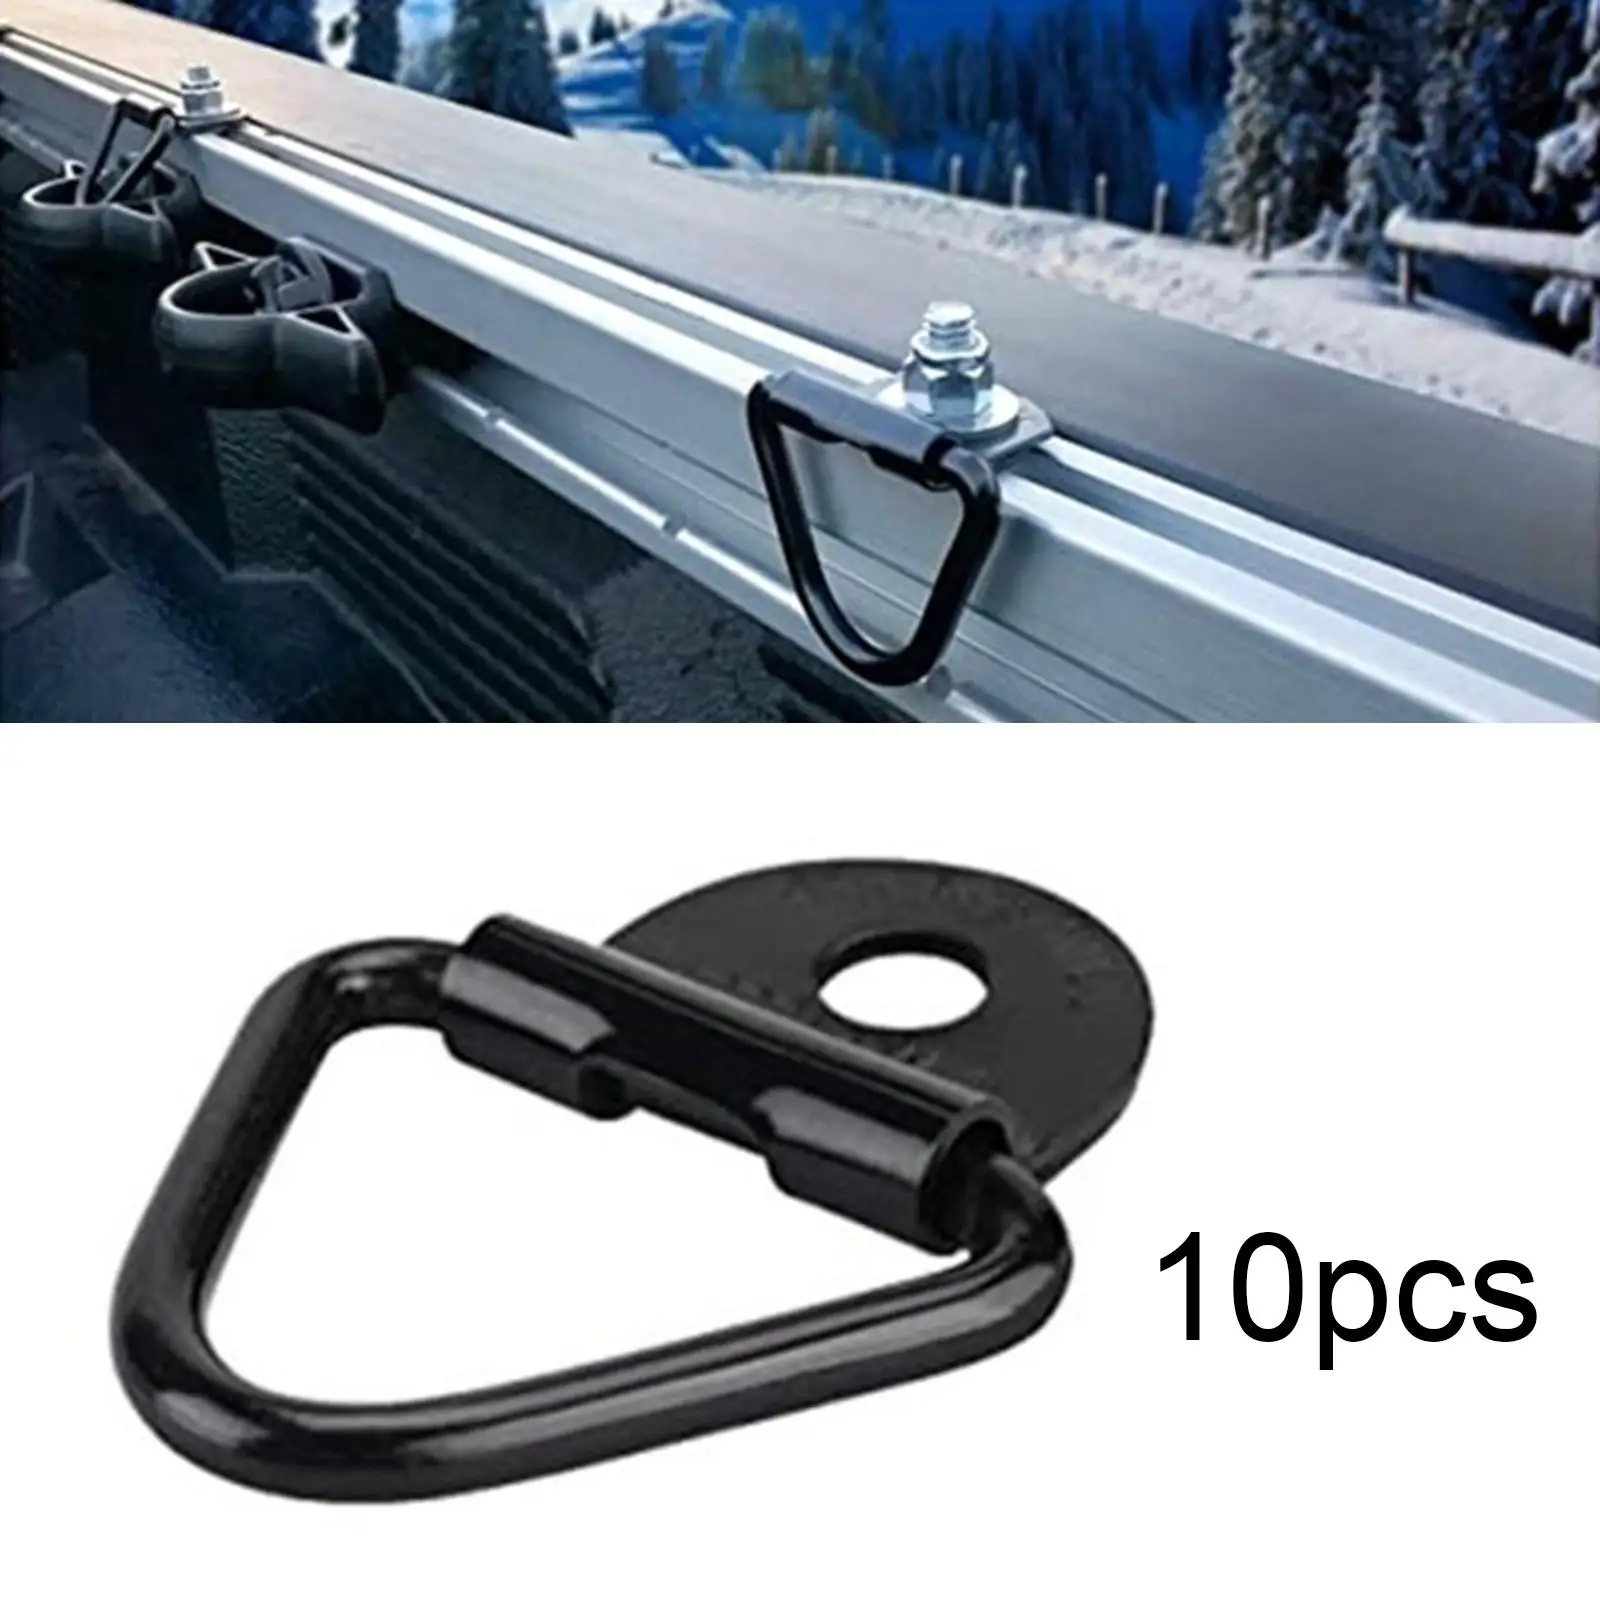 2x 10Pcs D Rings  Anchors, Stainless Steel Pull Hook Black Lashing    for Boats Loads on Case Truck Trailers